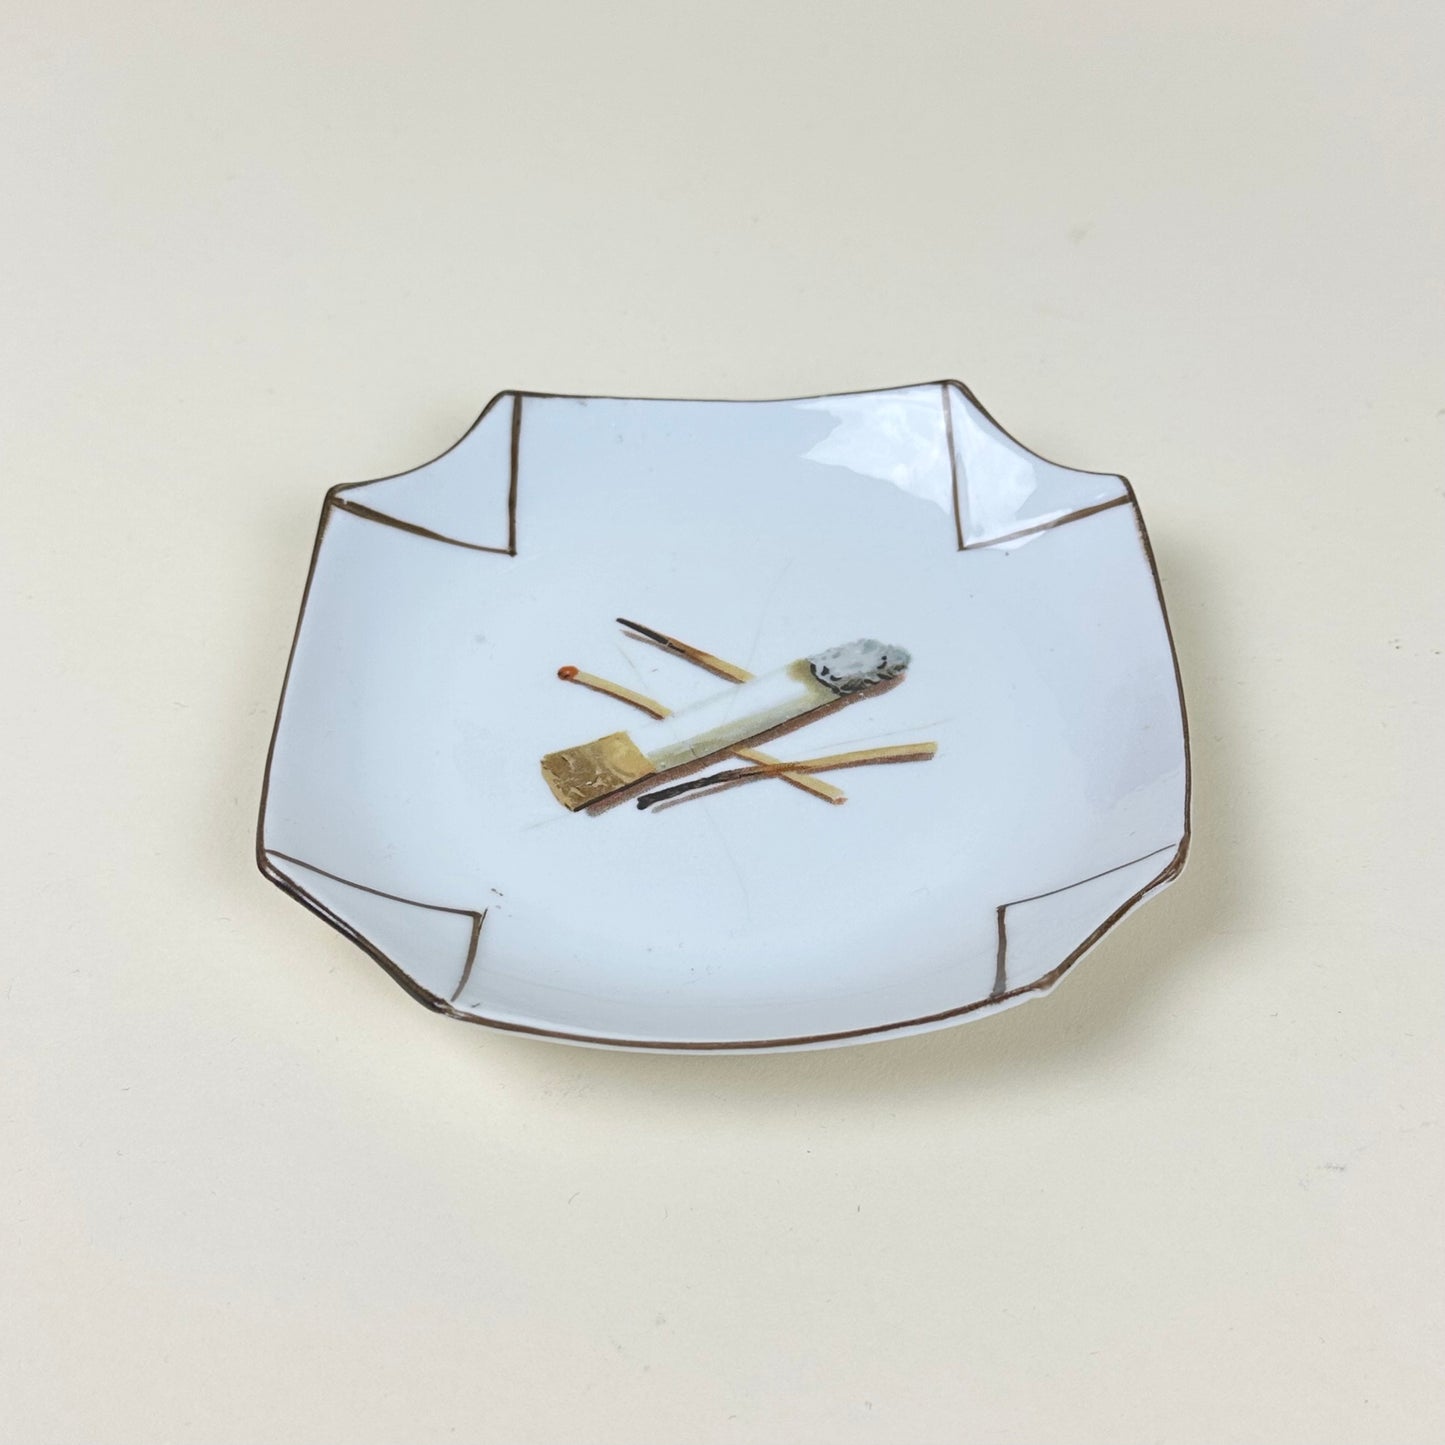 Ashtray with cigarette butt, vintage